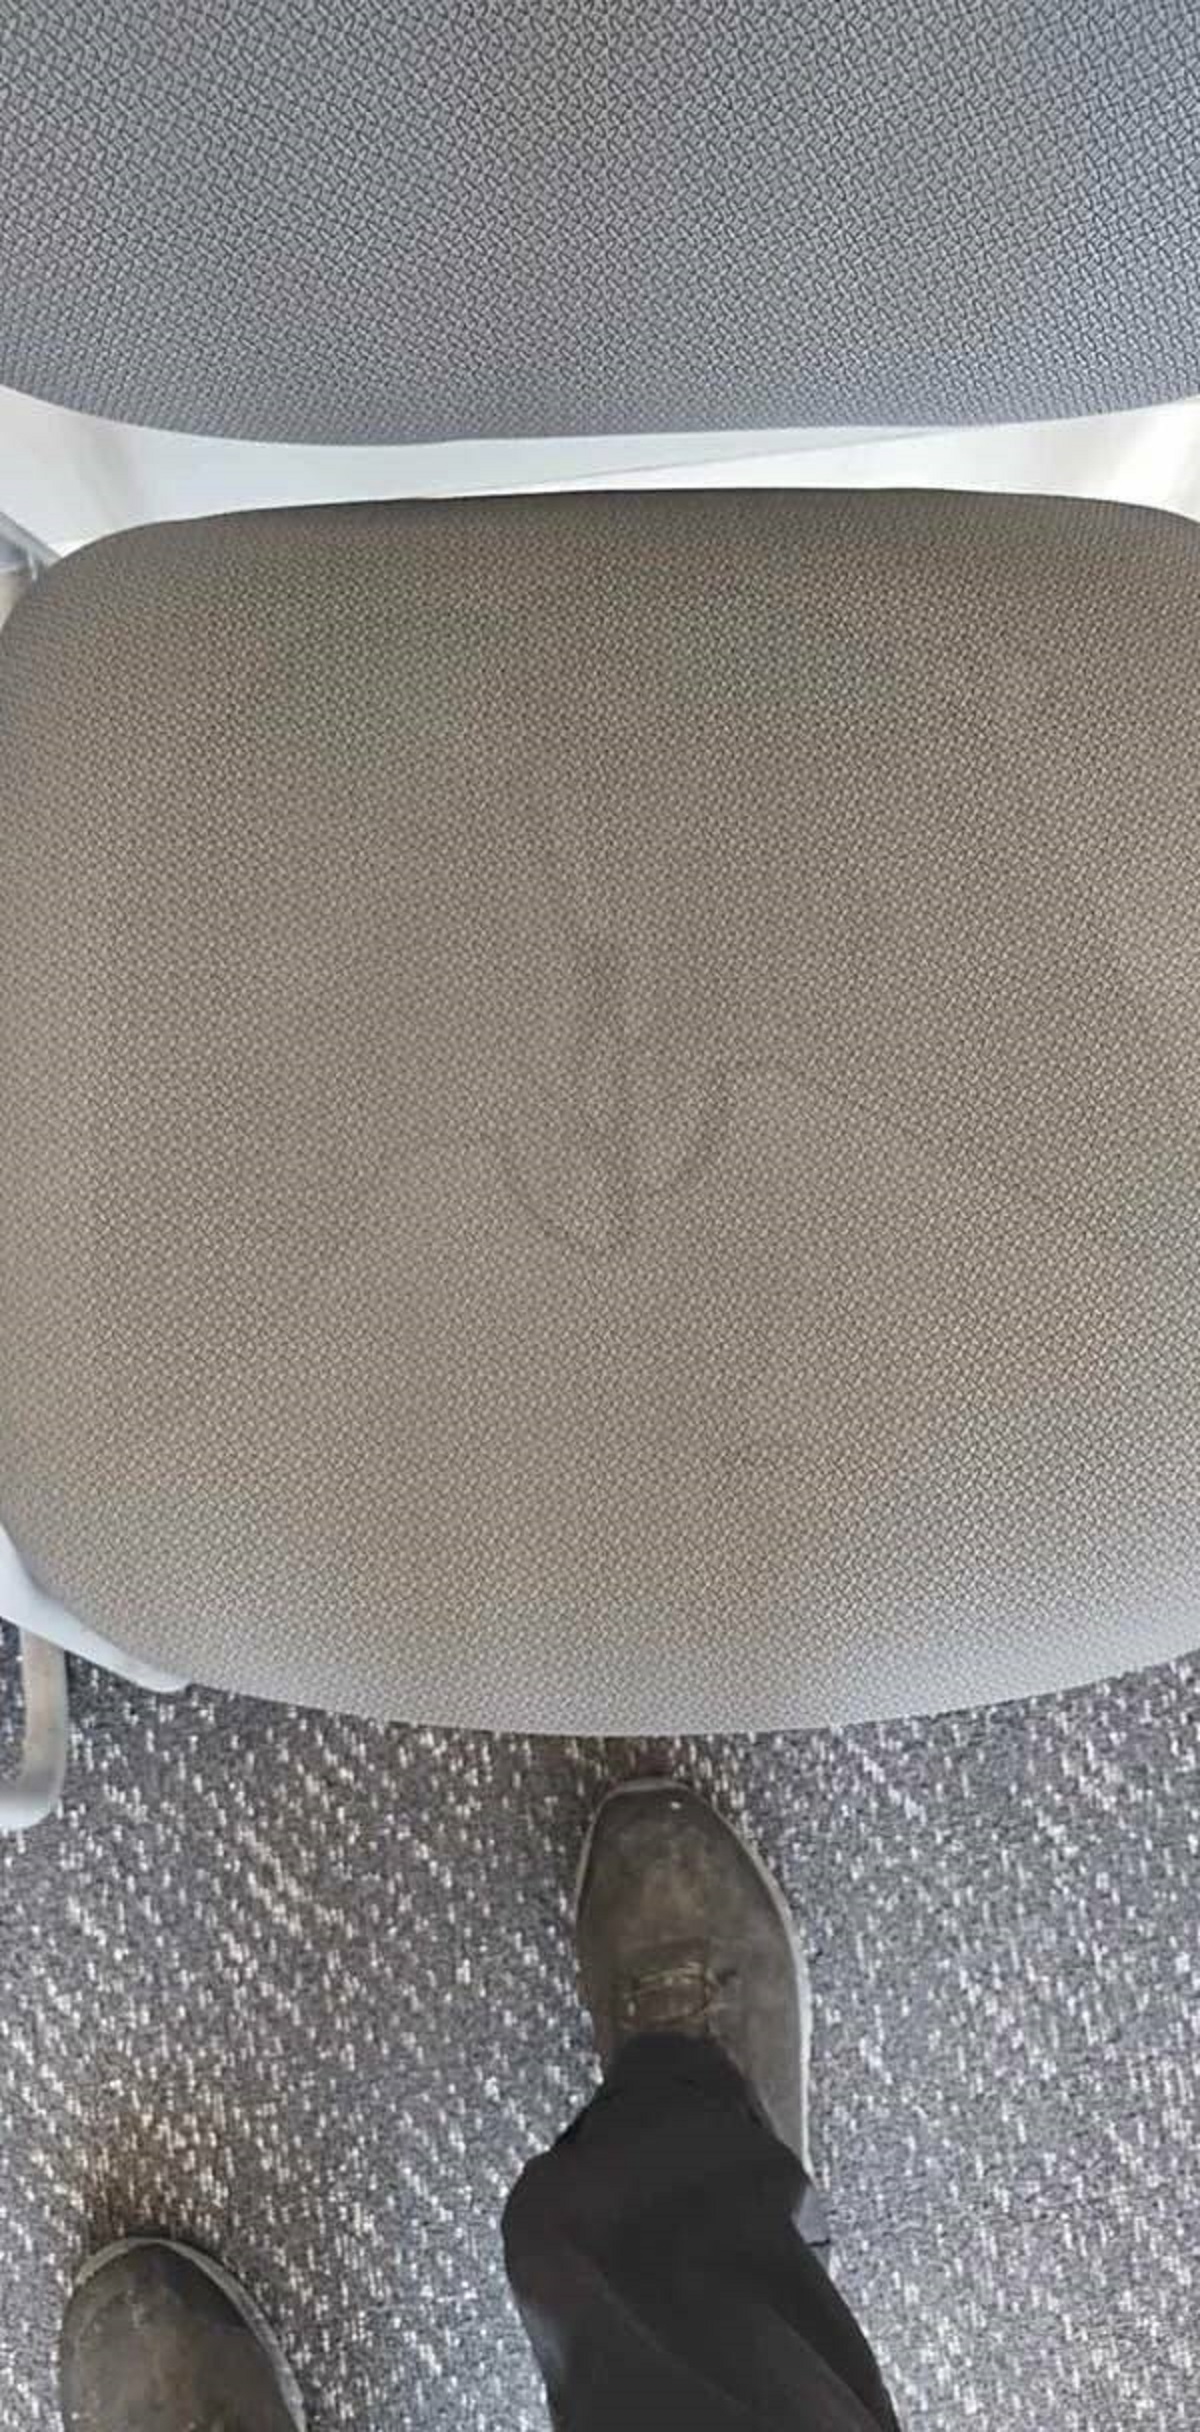 "My 'new' chair at work."